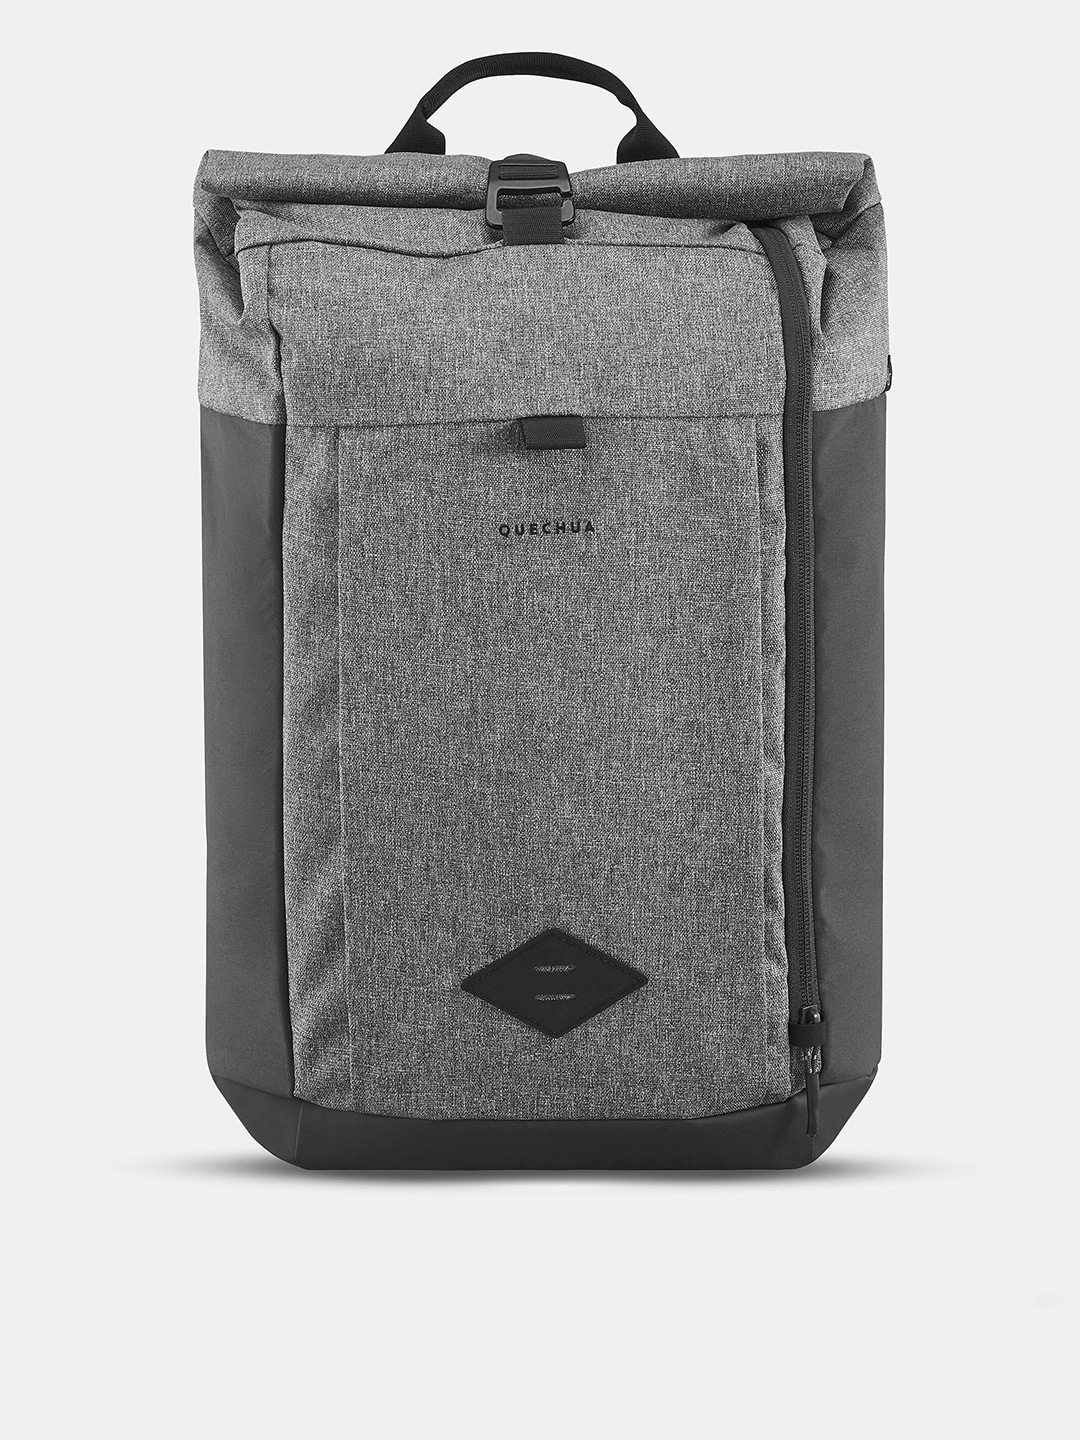 Accessories Backpacks | Quechua By Decathlon Unisex Grey Colourblocked Backpack - UO96392